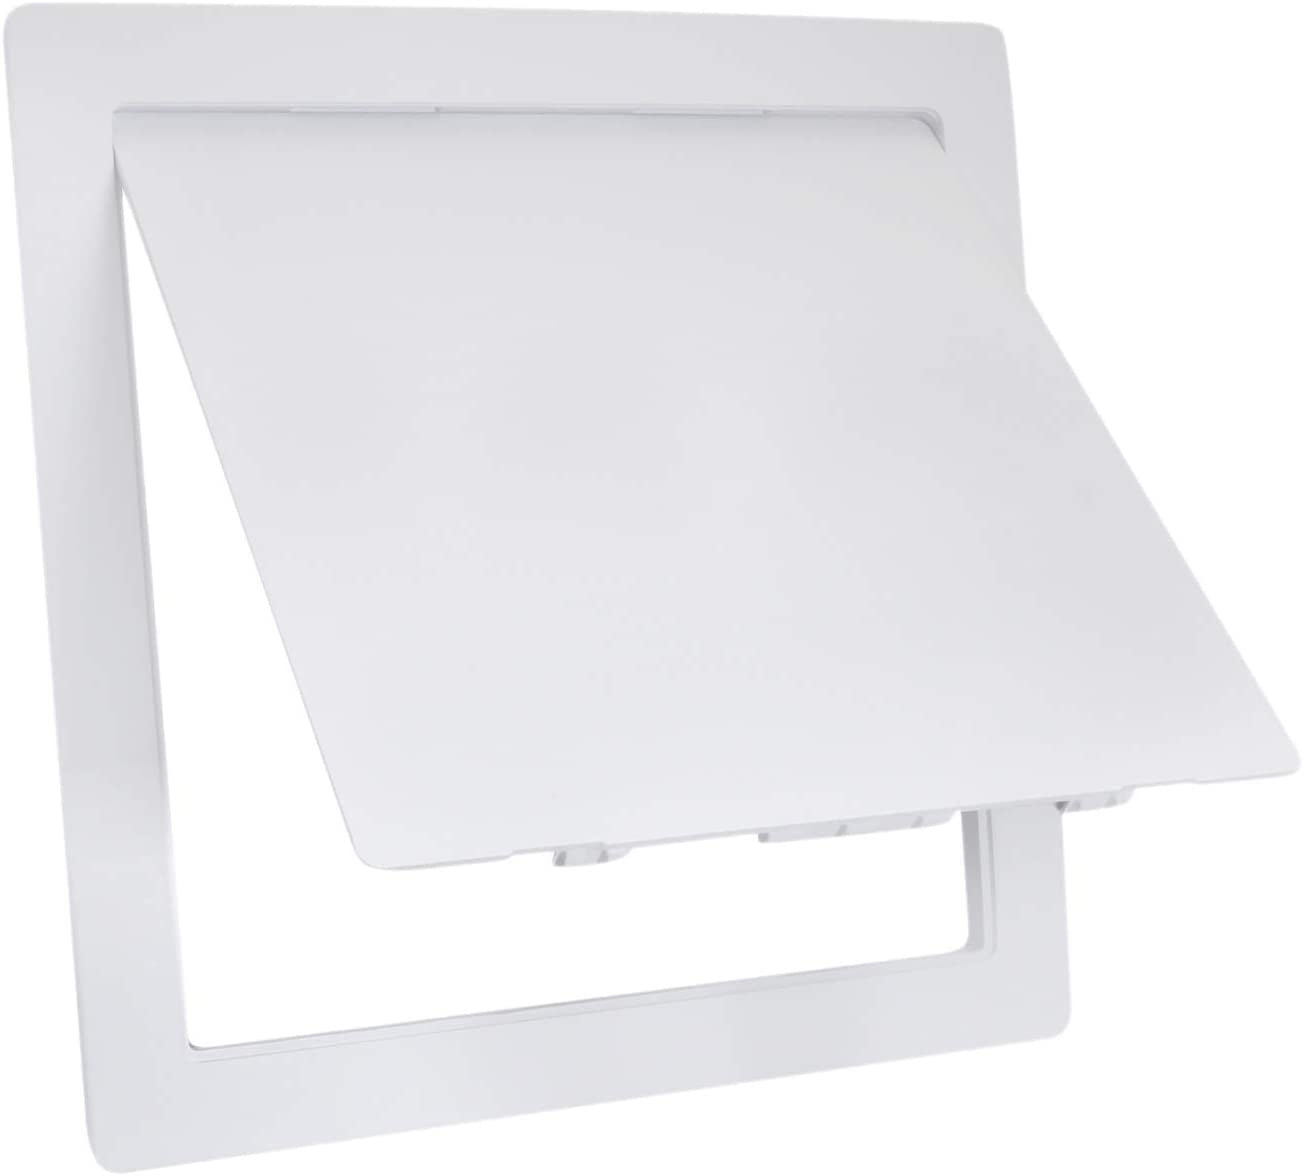 Plastic Access Panel for Drywall Ceiling 14 x 14 Inch Reinforced Plumbing Wall Access Door